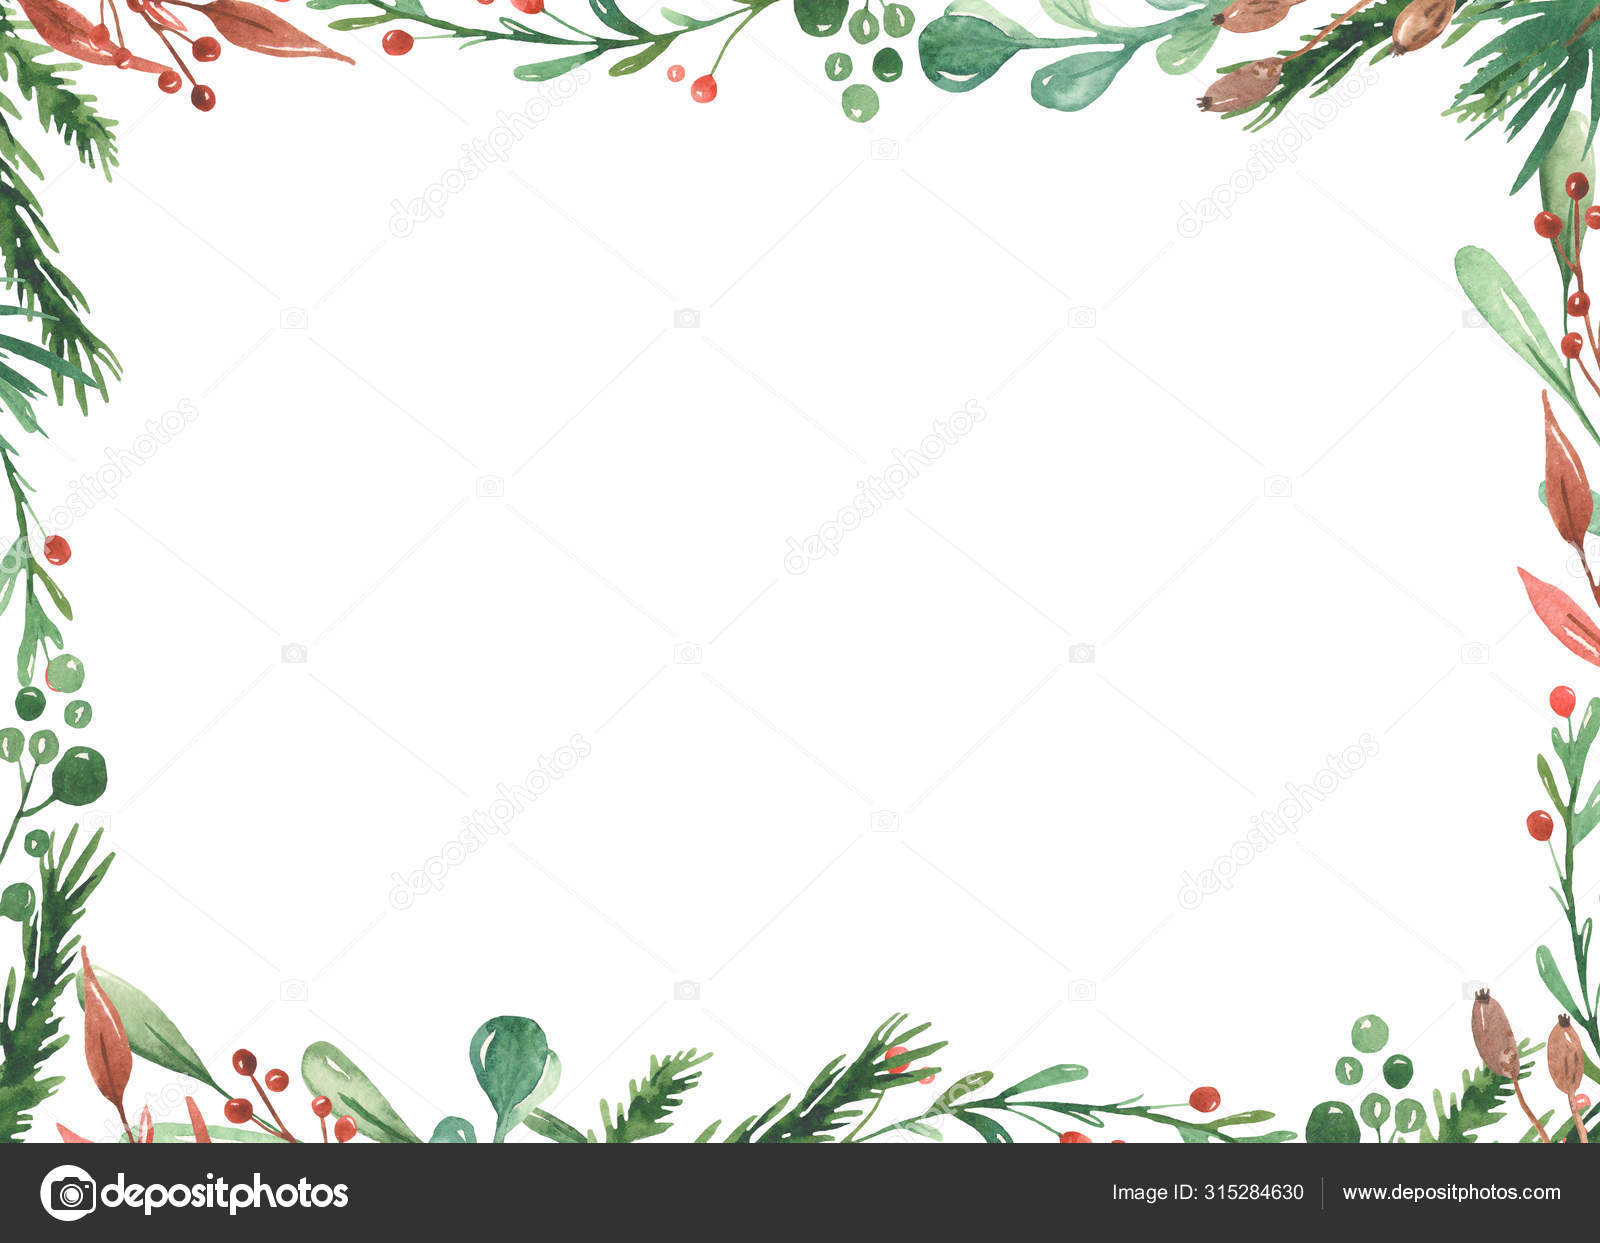 Watercolor Christmas Frame With Spruce Branches Leaves Berries Stock Photo C Marinaermakova 315284630